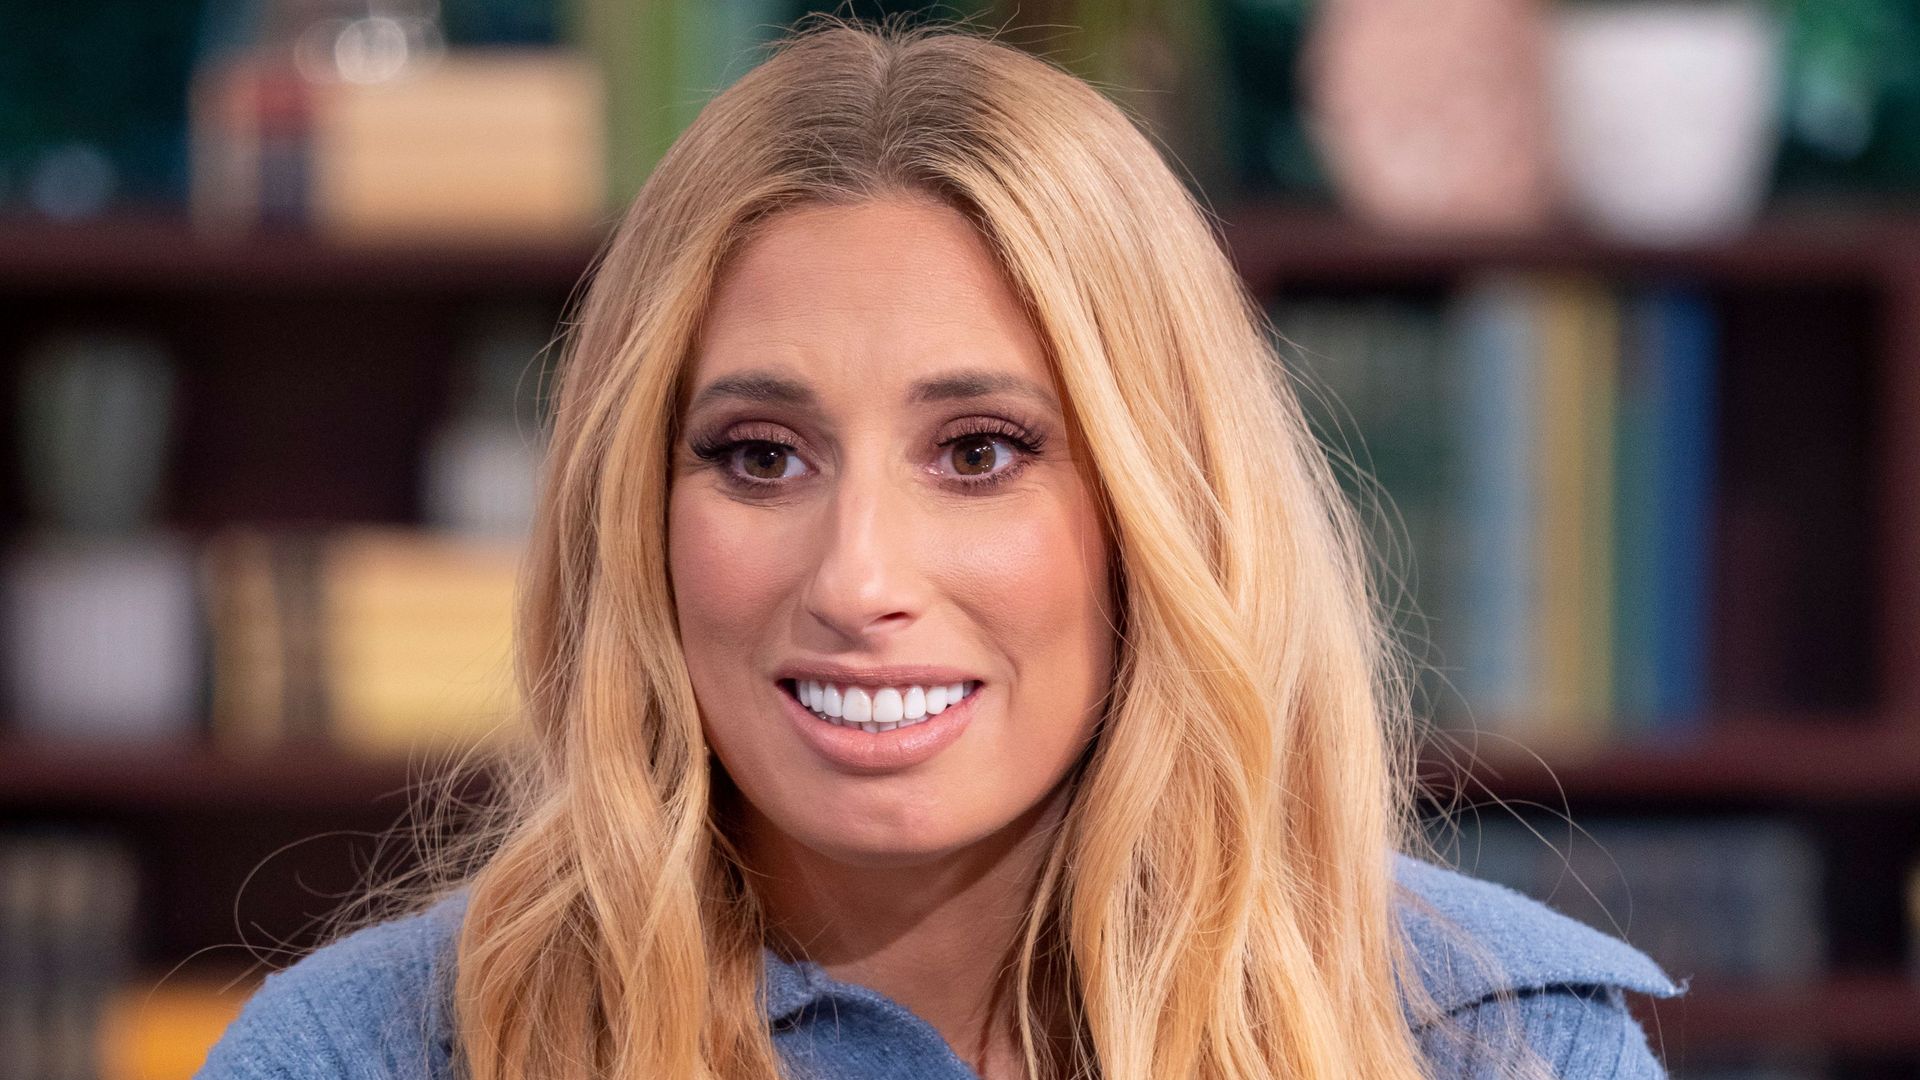 Stacey solomon left 'gutted' as family 'say goodbye' in holiday update